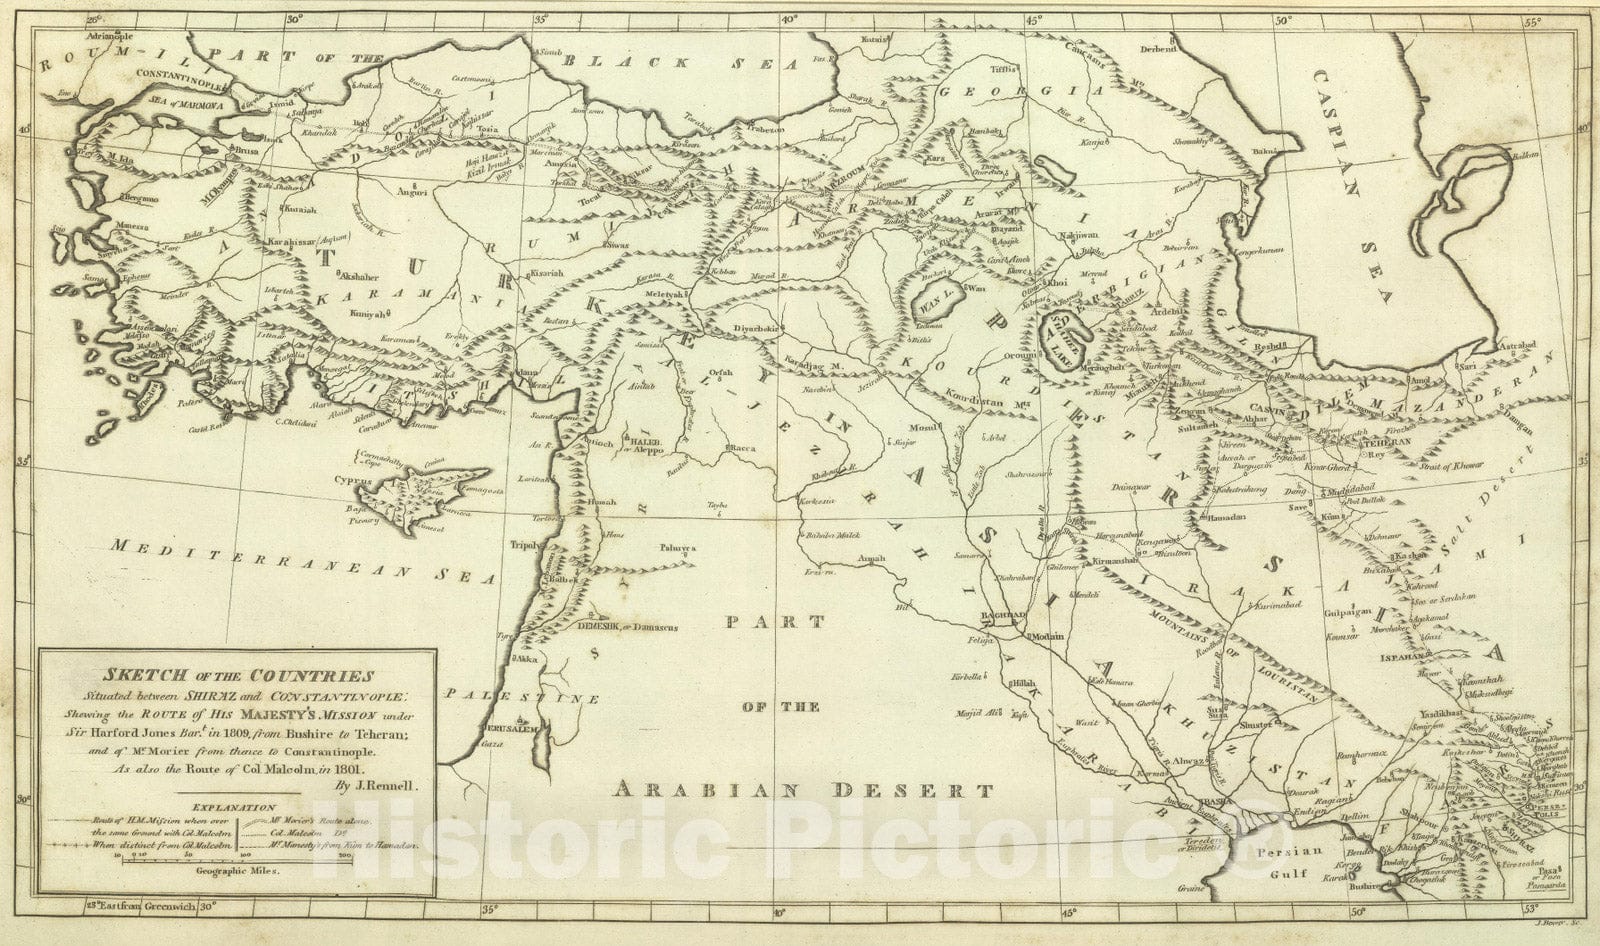 Historic Map : 1824 Countries Situated between Shiraz and Constantinople. - Vintage Wall Art